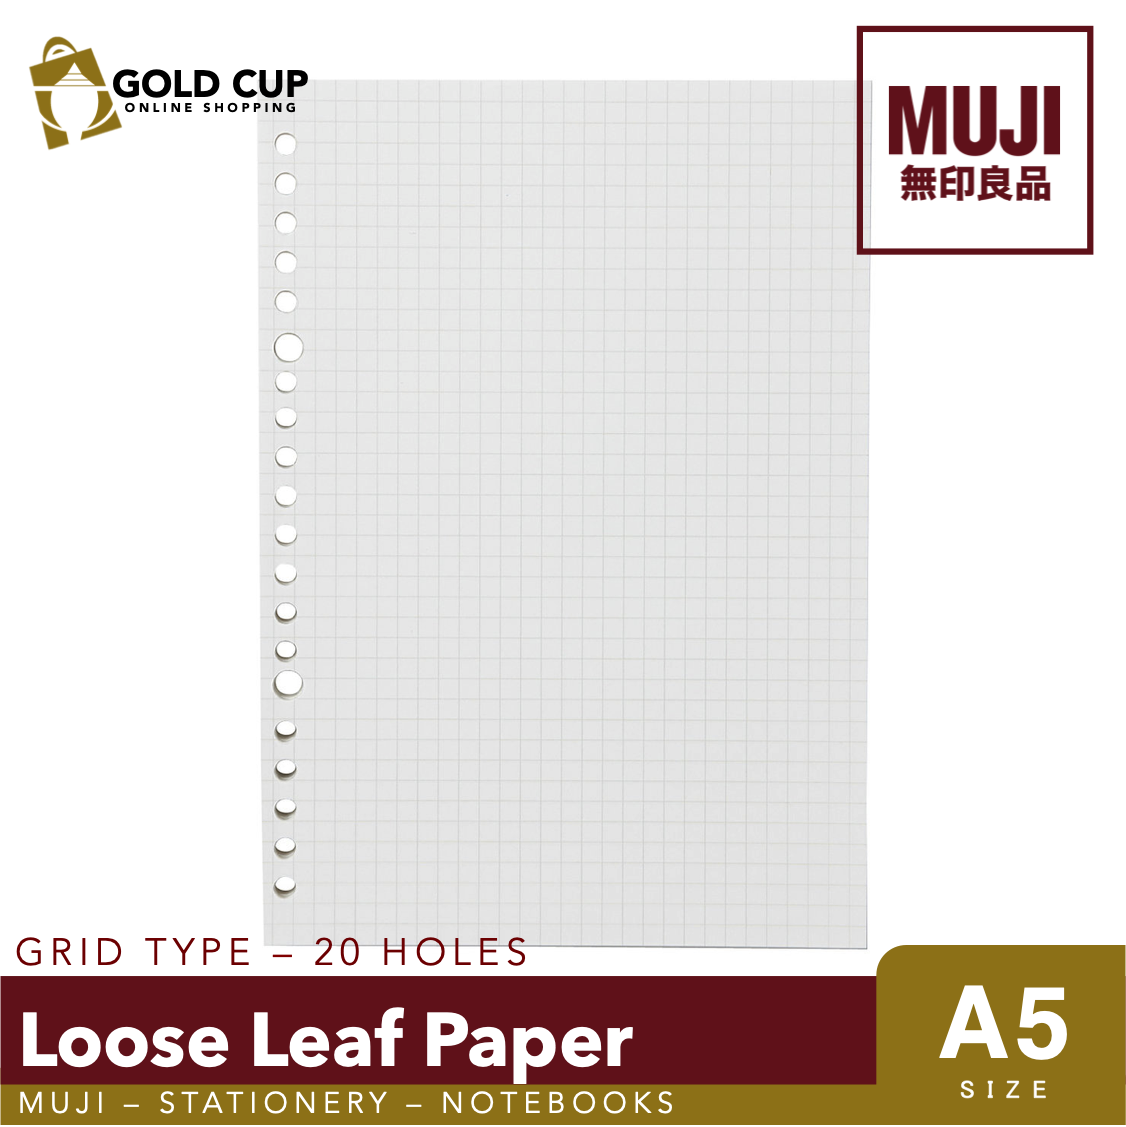 Hami Notebook Refill Paper A5/B5 Loose Leaf Paper 20/26 Holes Refill Pages  Spiral Binder Paper (60 Sheets)